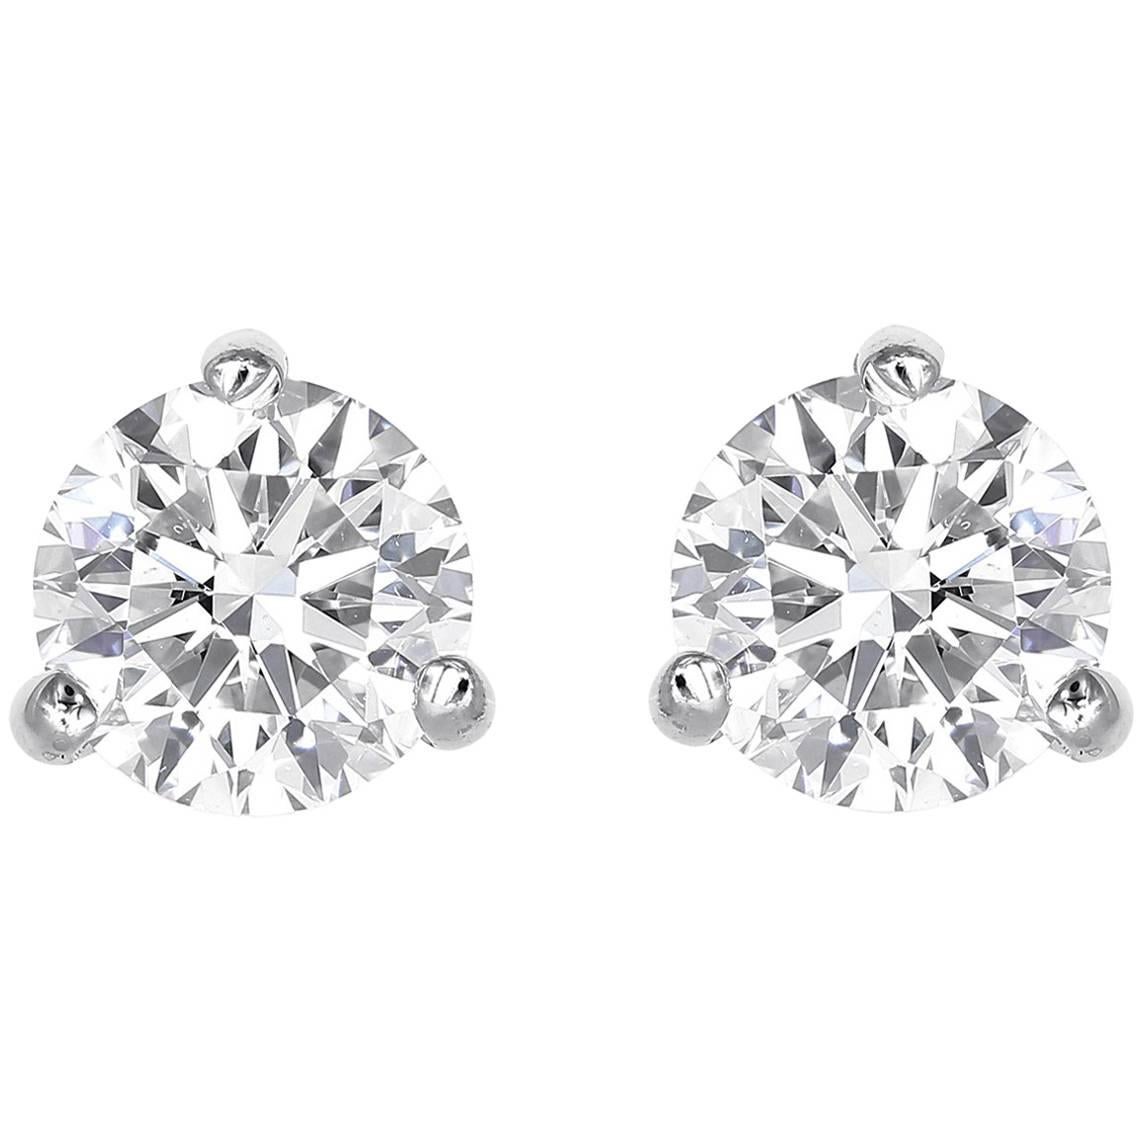 3.42 Total Carat Weight GIA Certified Diamond Stud Earrings H/SI1 For Sale